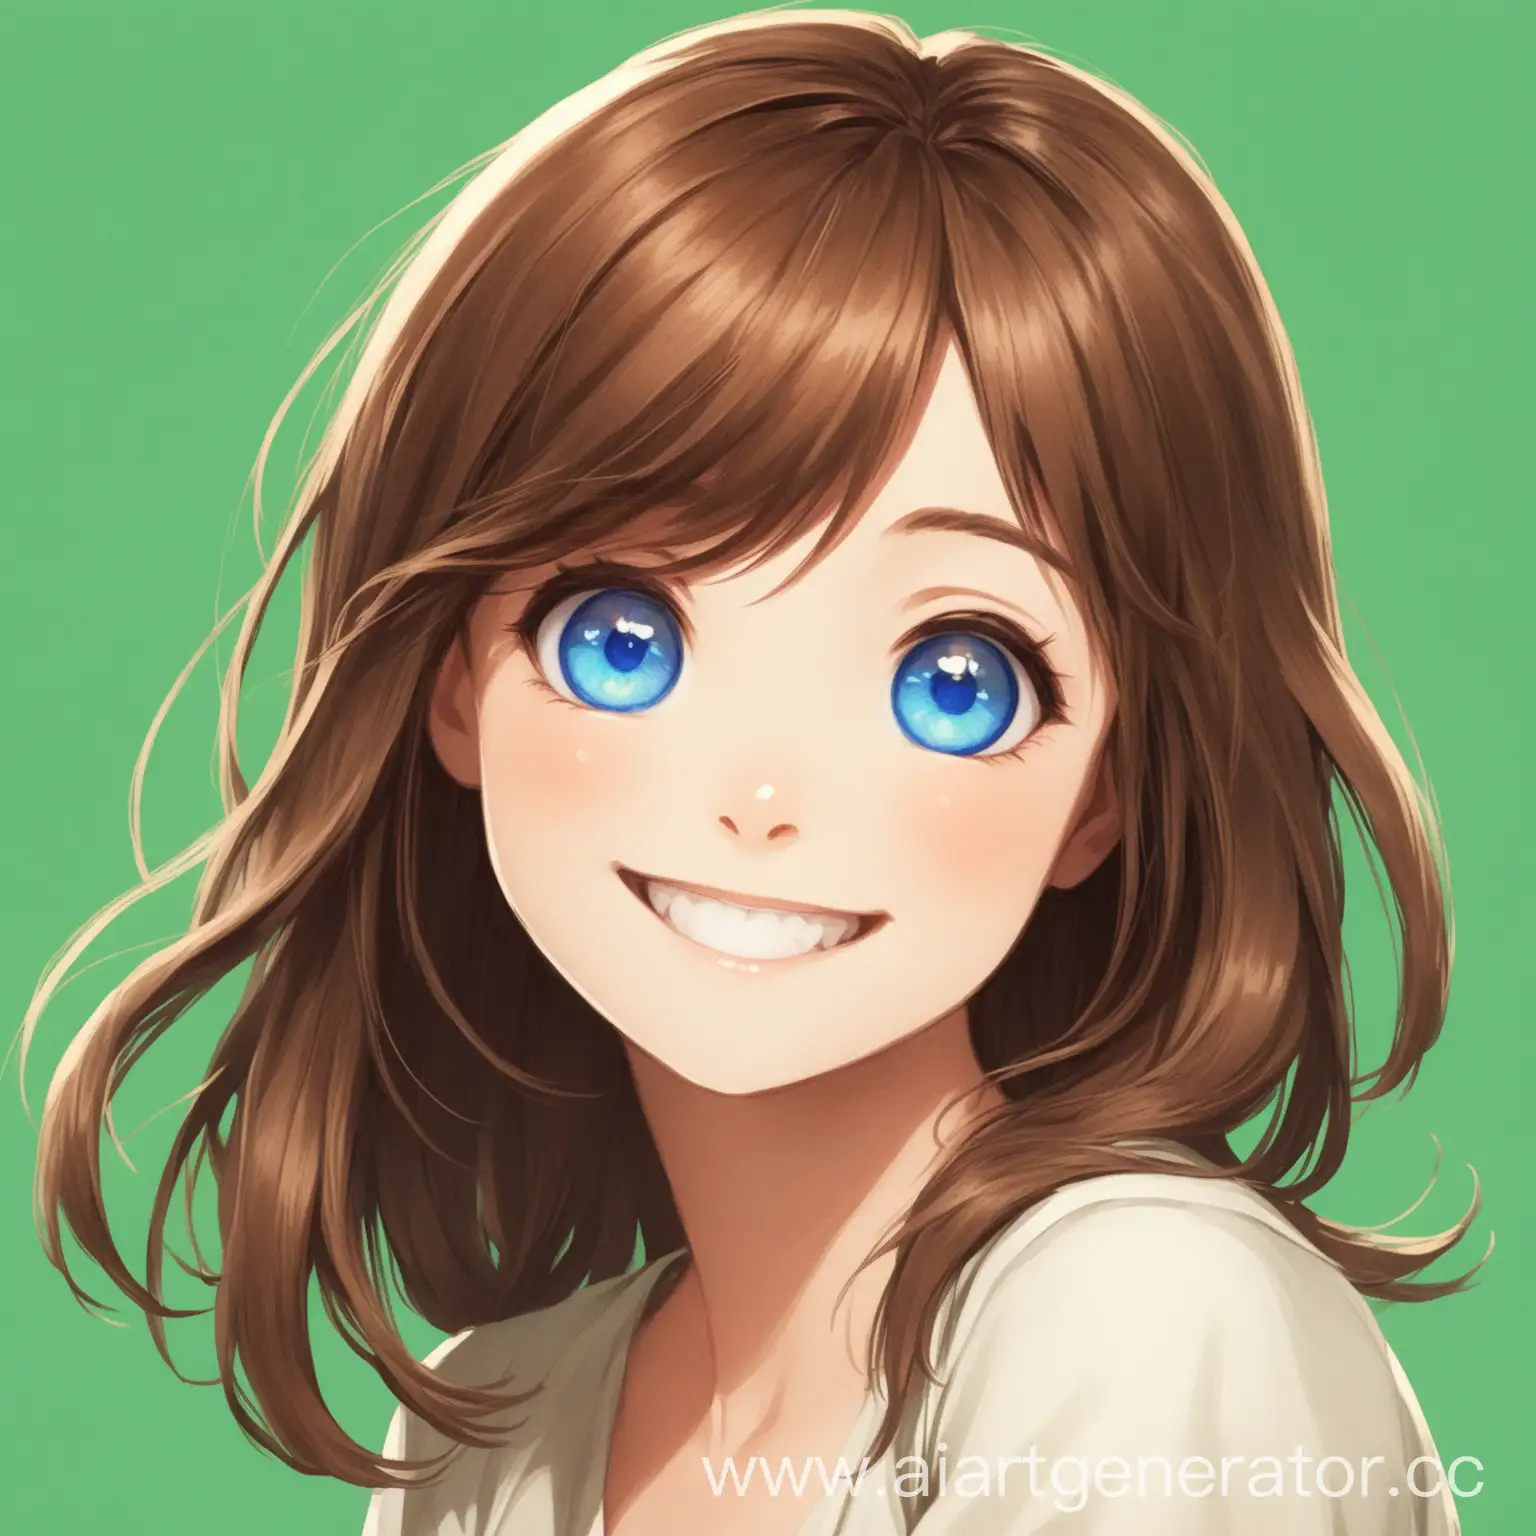 Happy-Girl-with-Brown-Hair-and-Blue-Eyes-on-Green-Background